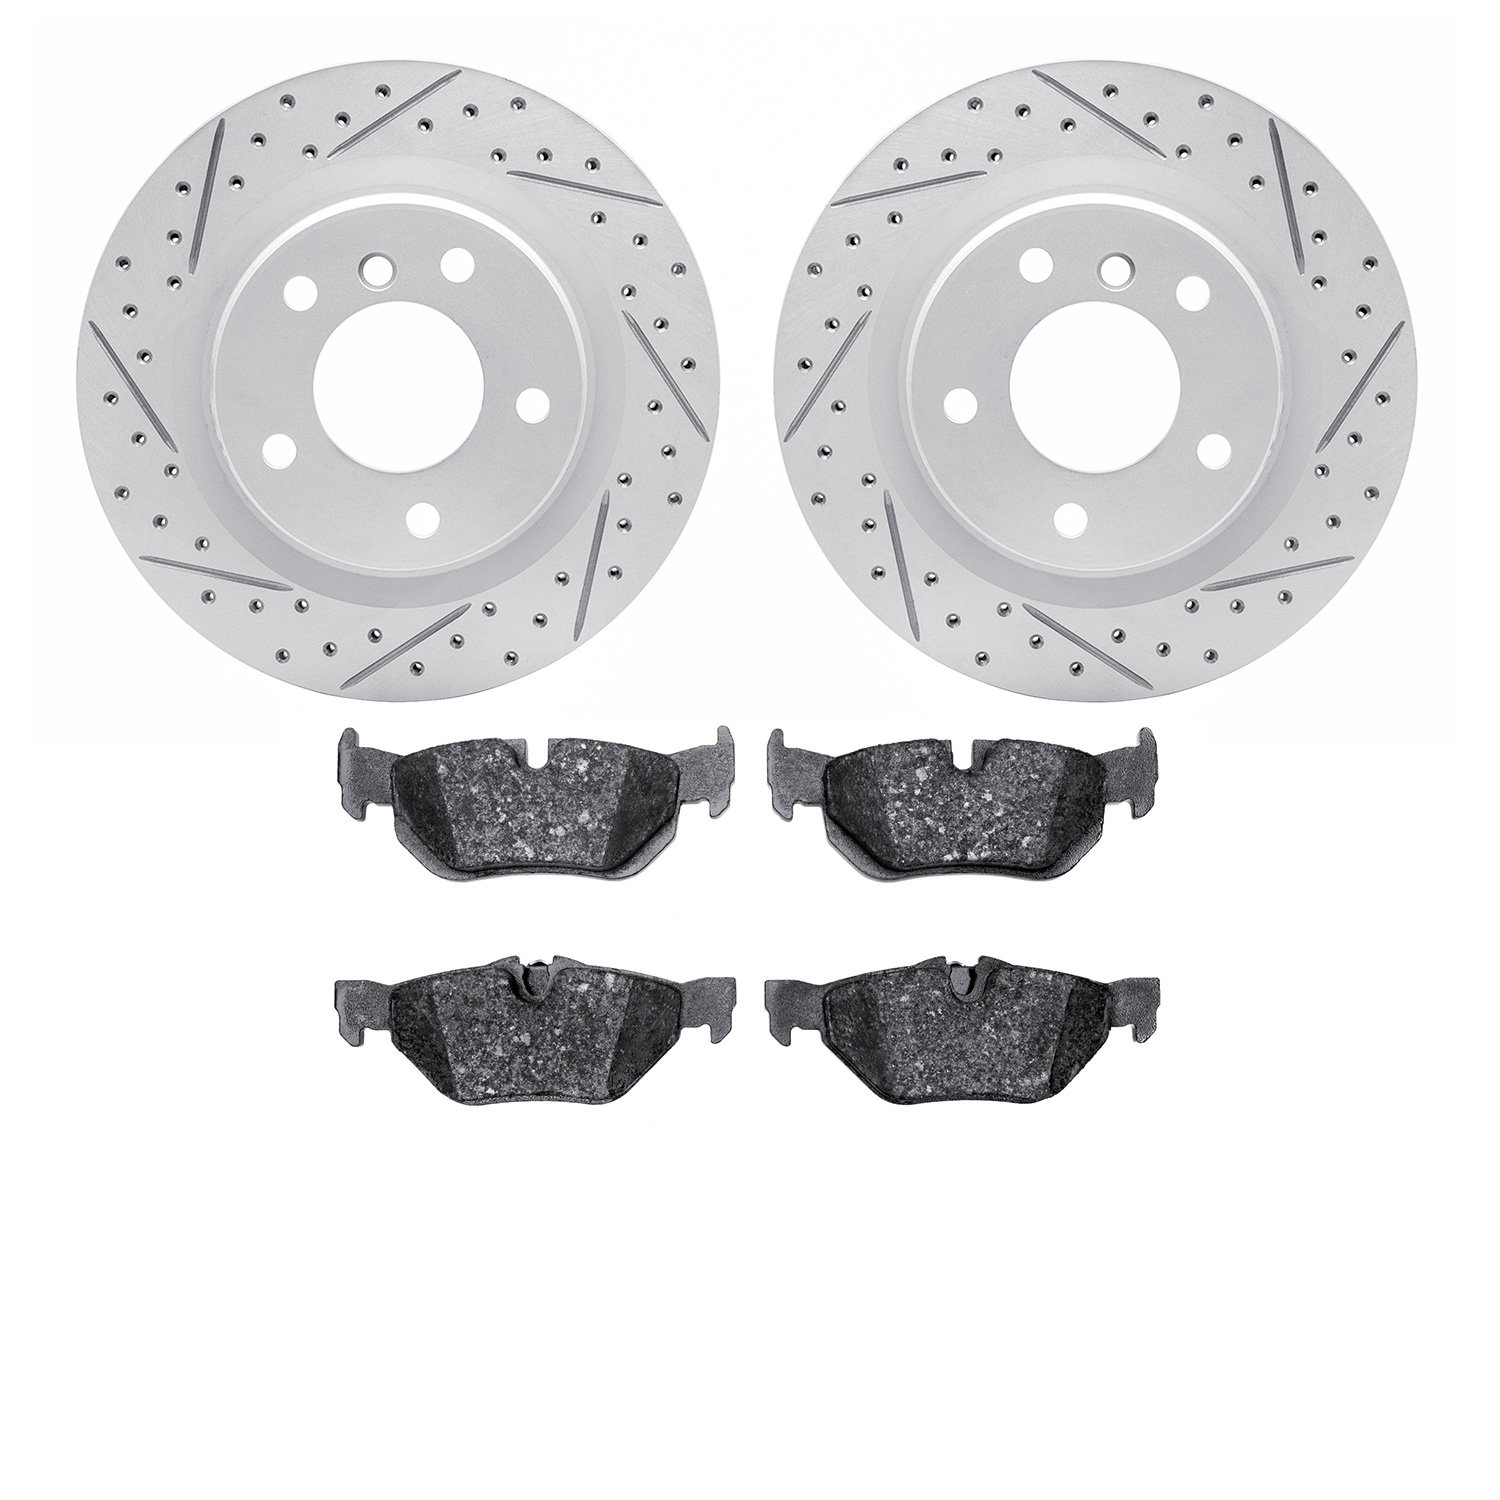 2502-31054 Geoperformance Drilled/Slotted Rotors w/5000 Advanced Brake Pads Kit, 2006-2013 BMW, Position: Rear